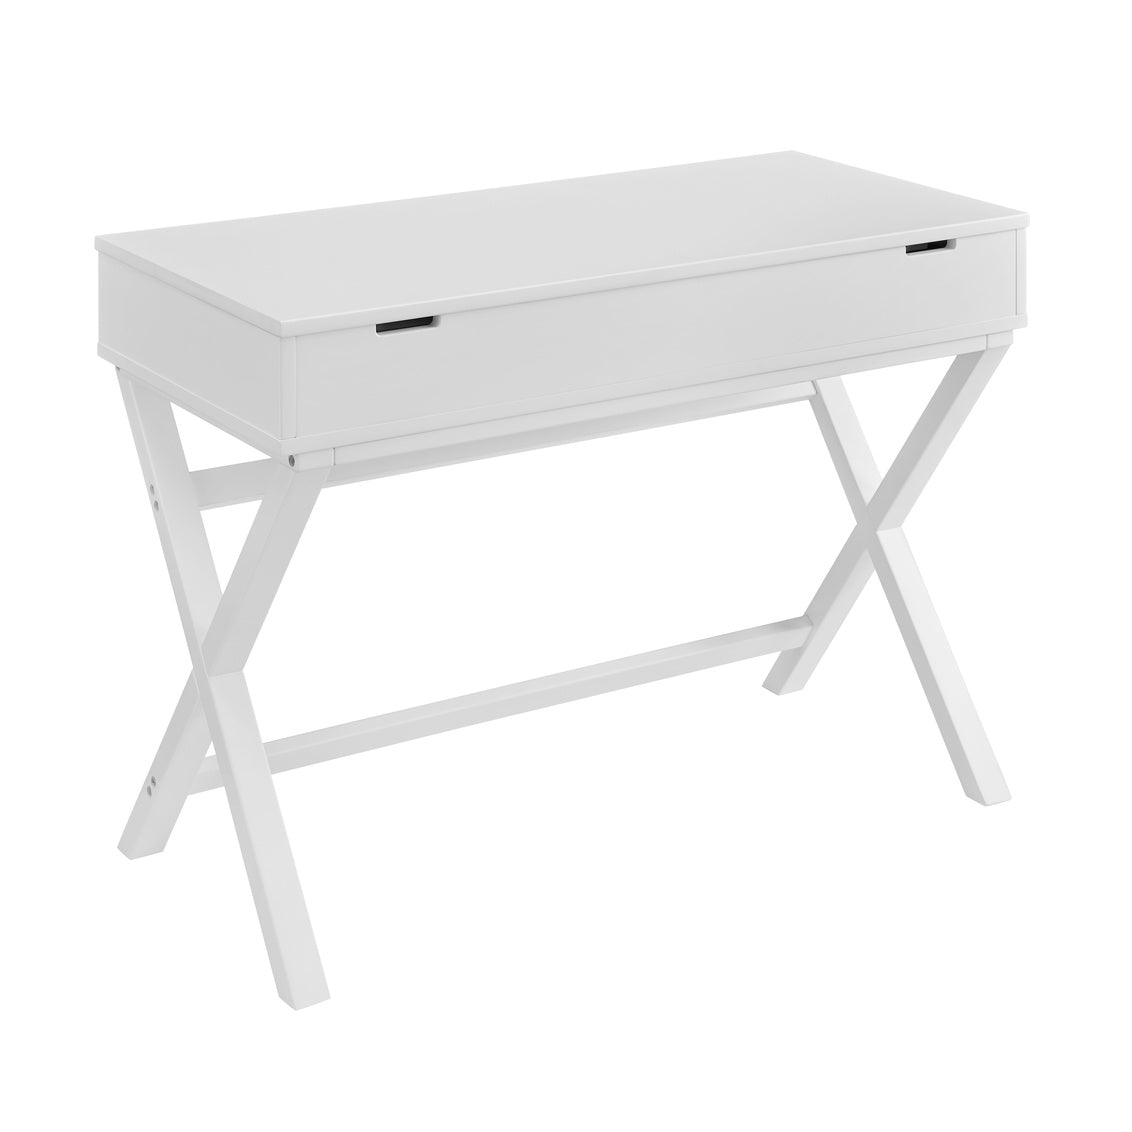 WEEKLY or MONTHLY. Amazing White Lift Top Desk